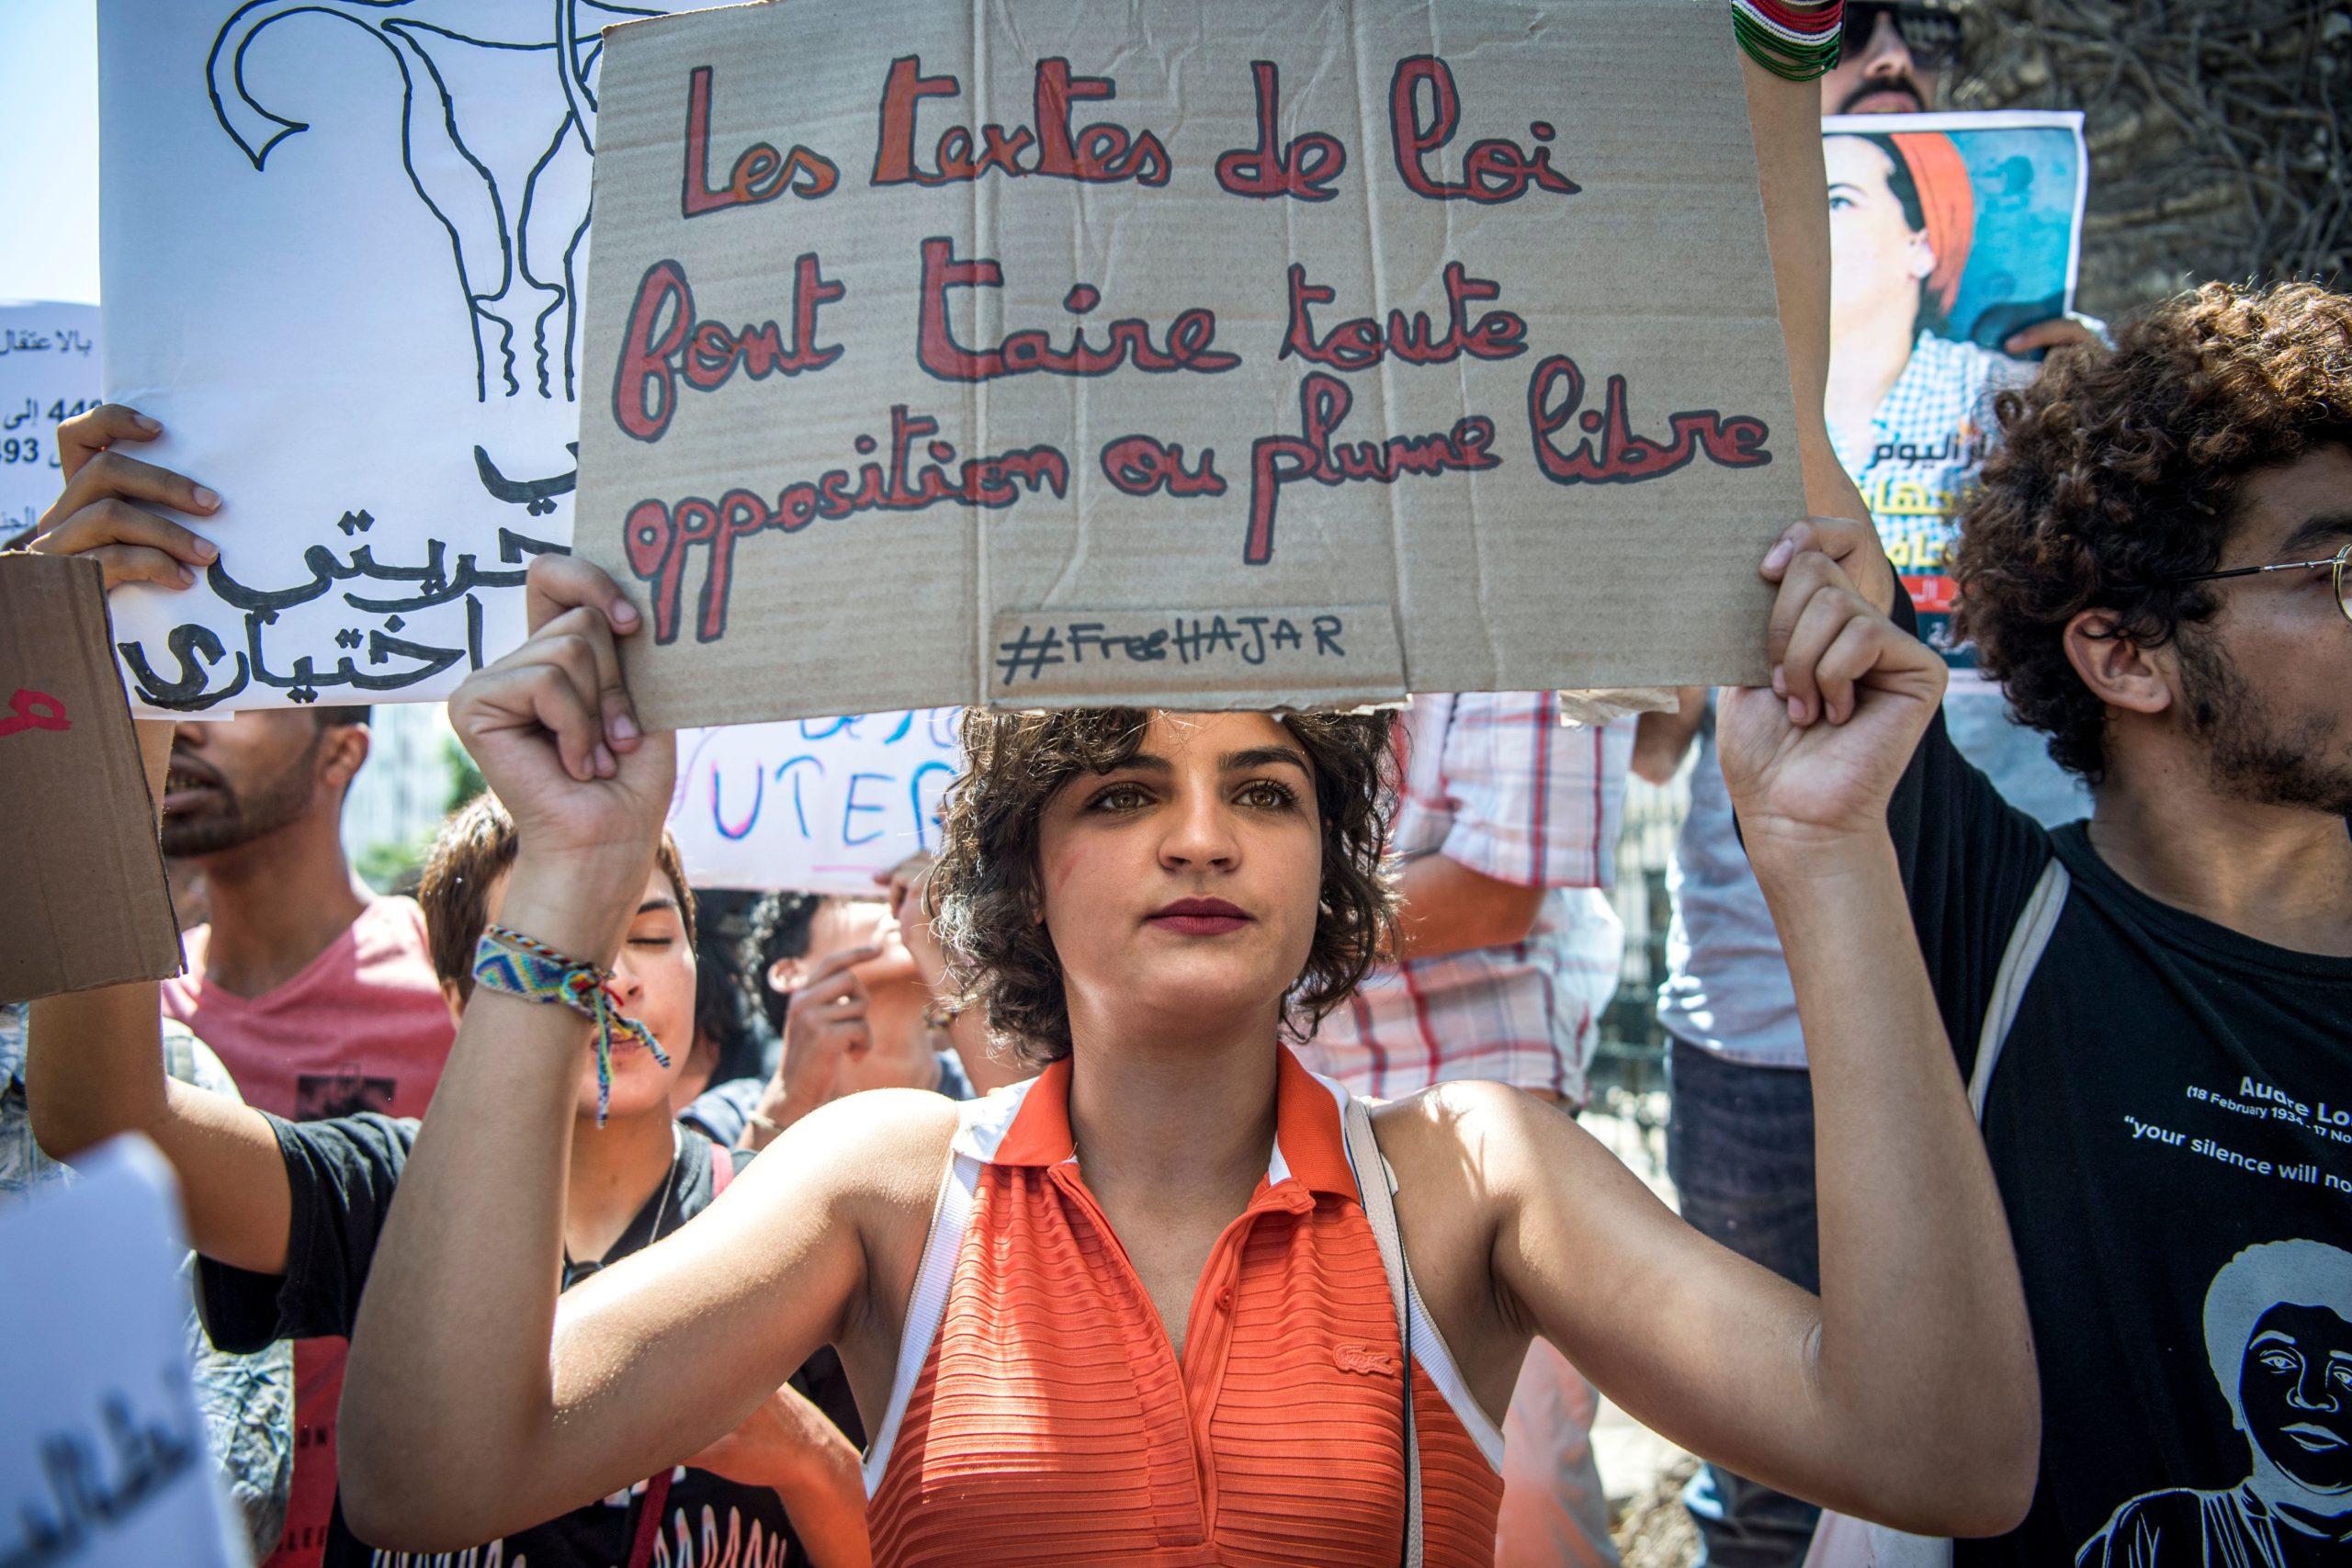 A demonstrator holds up a sign reading in French "the texts of the law silence all opposition or freedom of speech", during a protest outside a courthouse holding the trial of Hajar Raissouni, a Moroccan journalist of the daily newspaper Akhbar El-Youm, on charges of abortion, in the capital Rabat on September 9, 2019. (Photo by FADEL SENNA / AFP) (Photo credit should read FADEL SENNA/AFP via Getty Images)